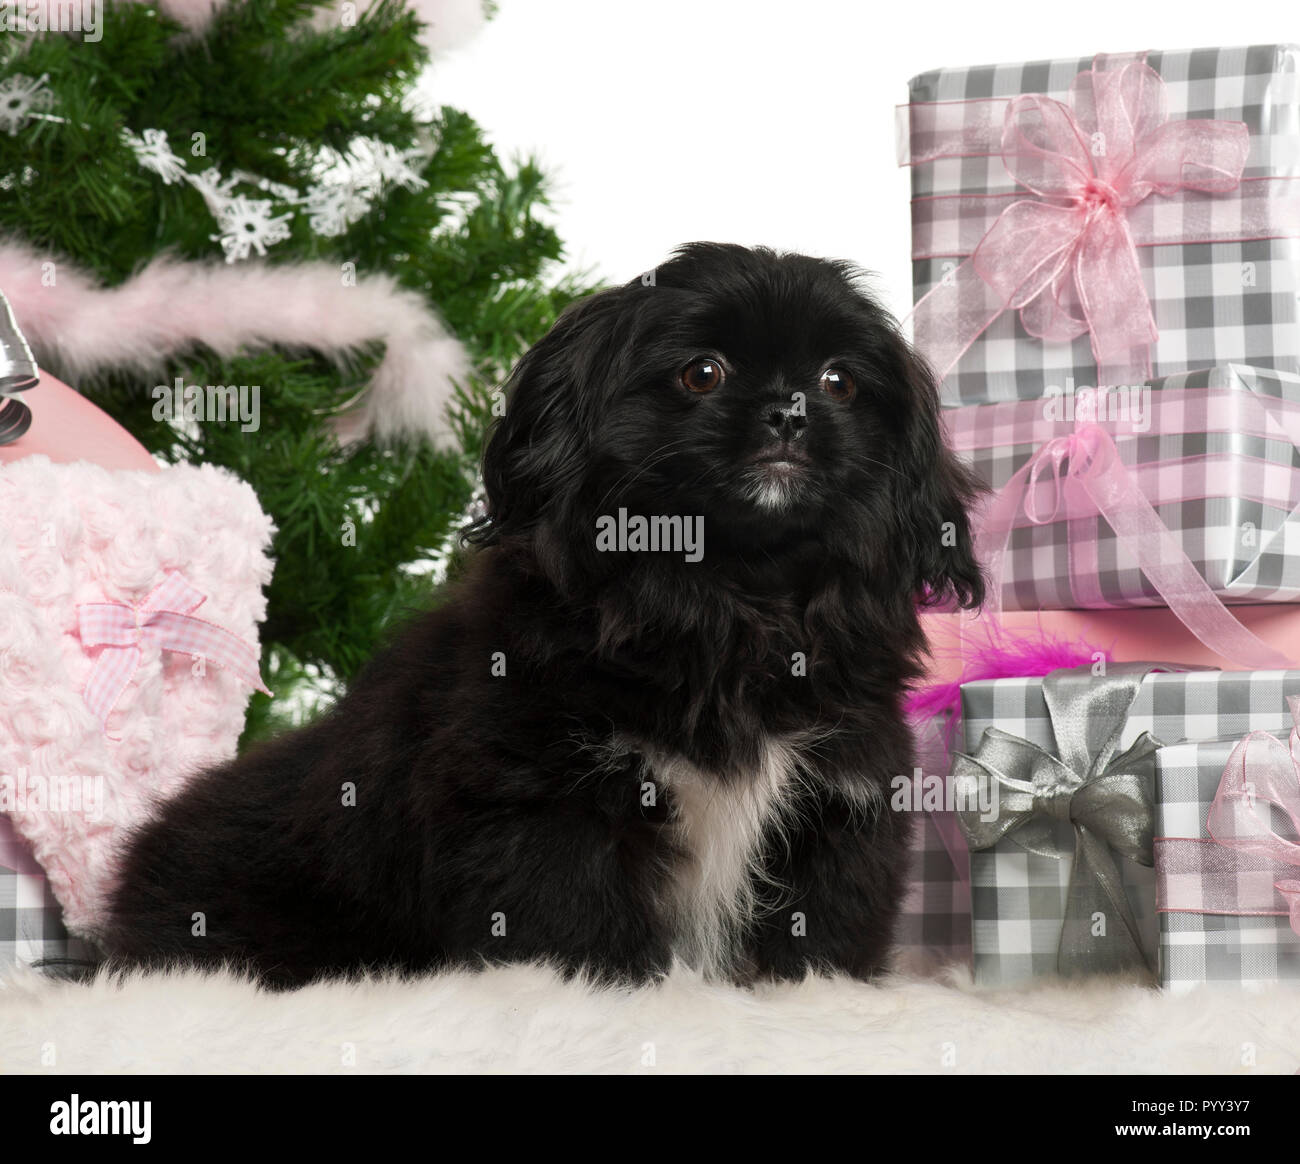 Pekingese puppy, 5 months old, sitting with Christmas tree and gifts in front of white background Stock Photo